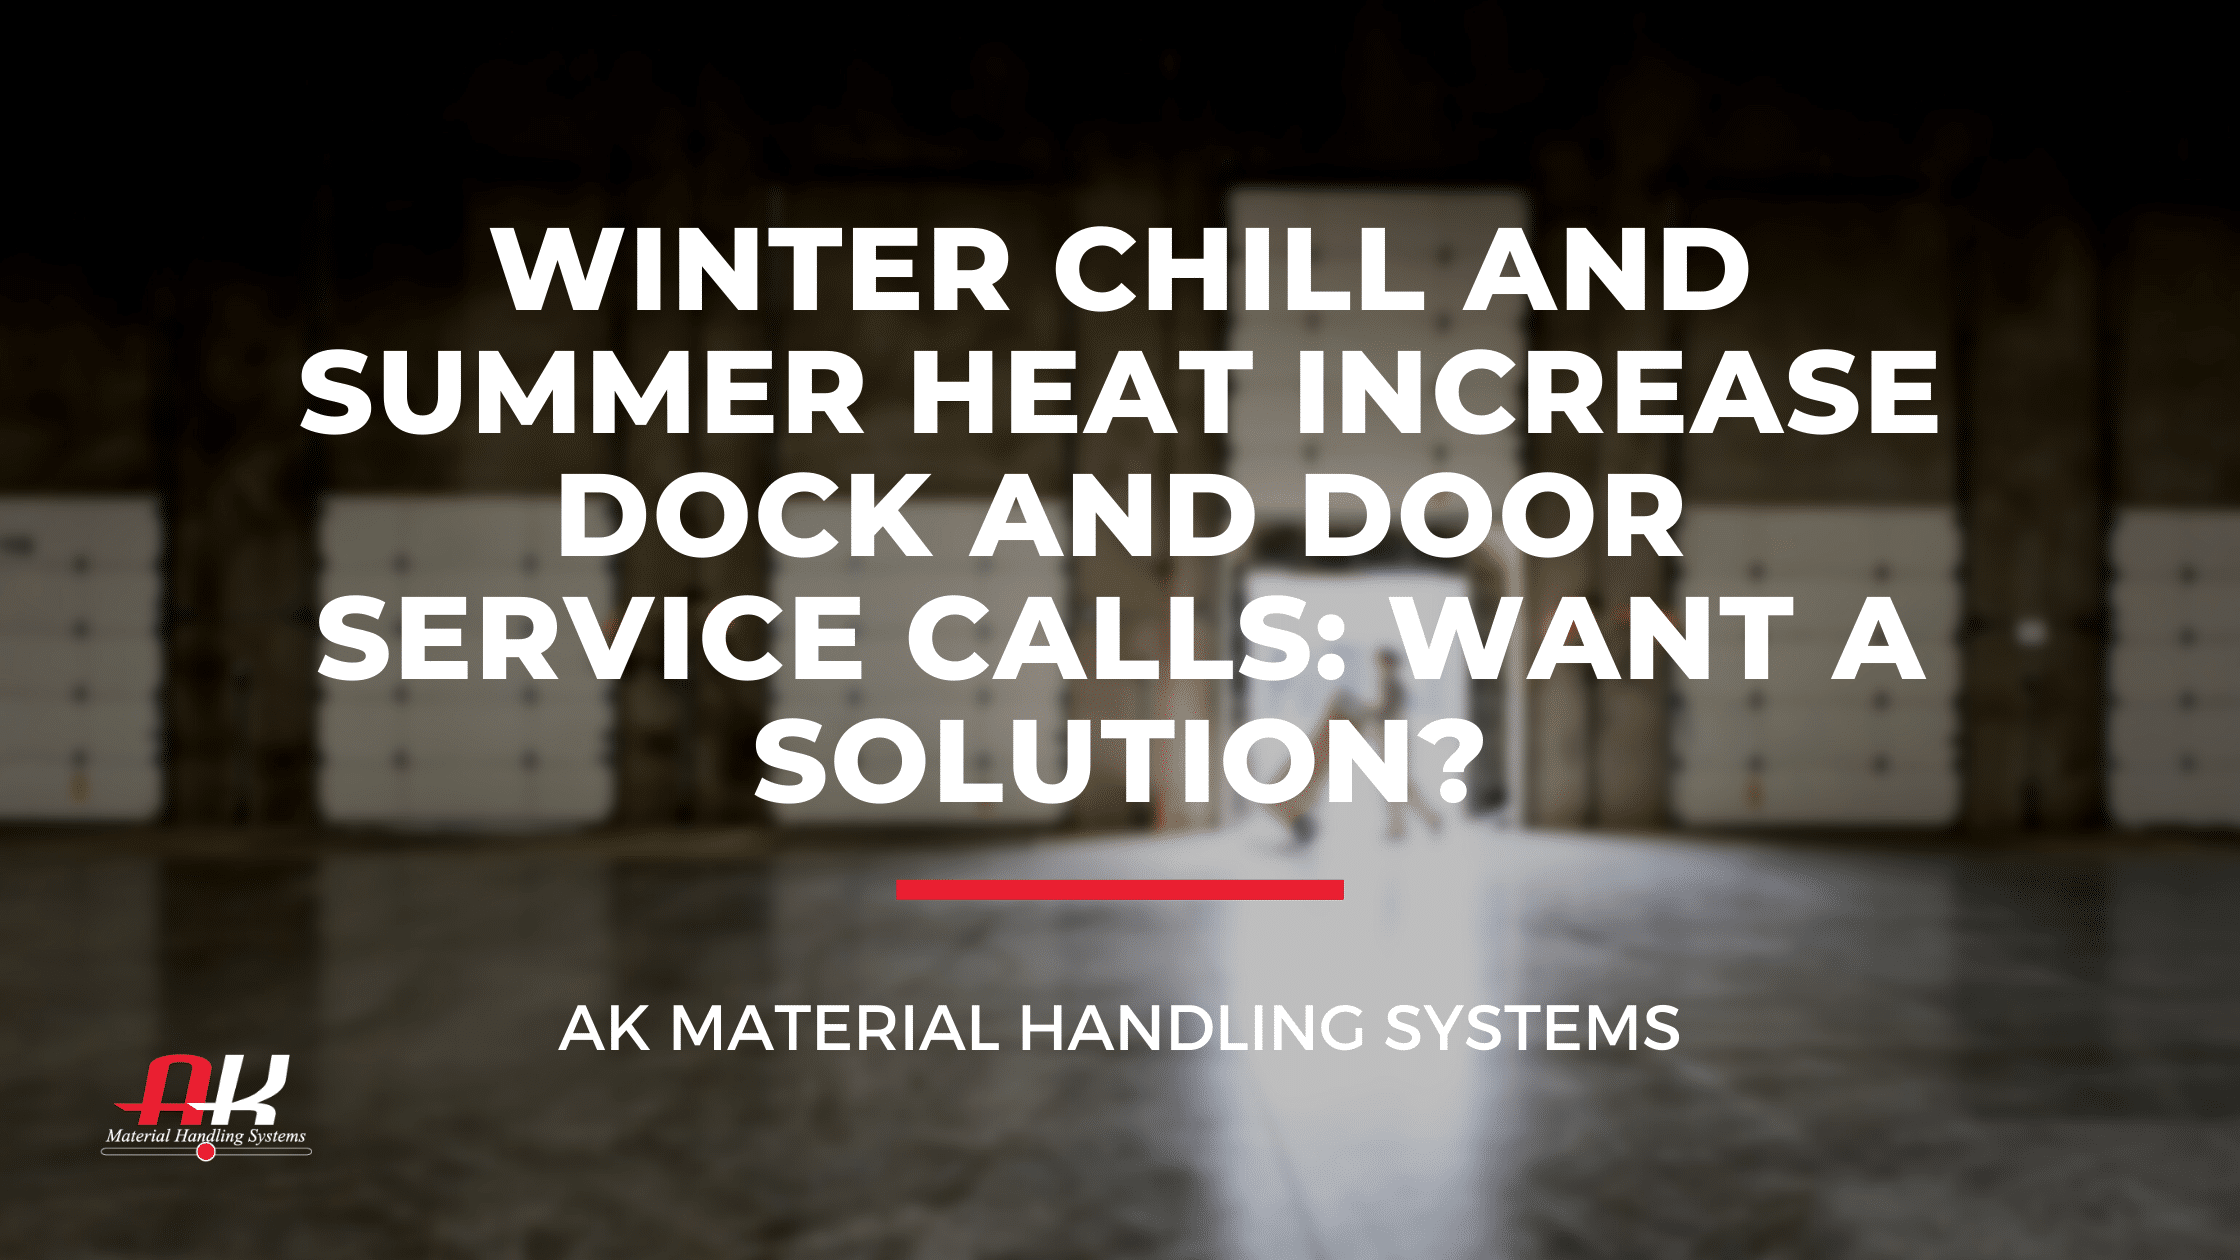 Winter chill and summer heat increase dock and door service calls: want a solution?